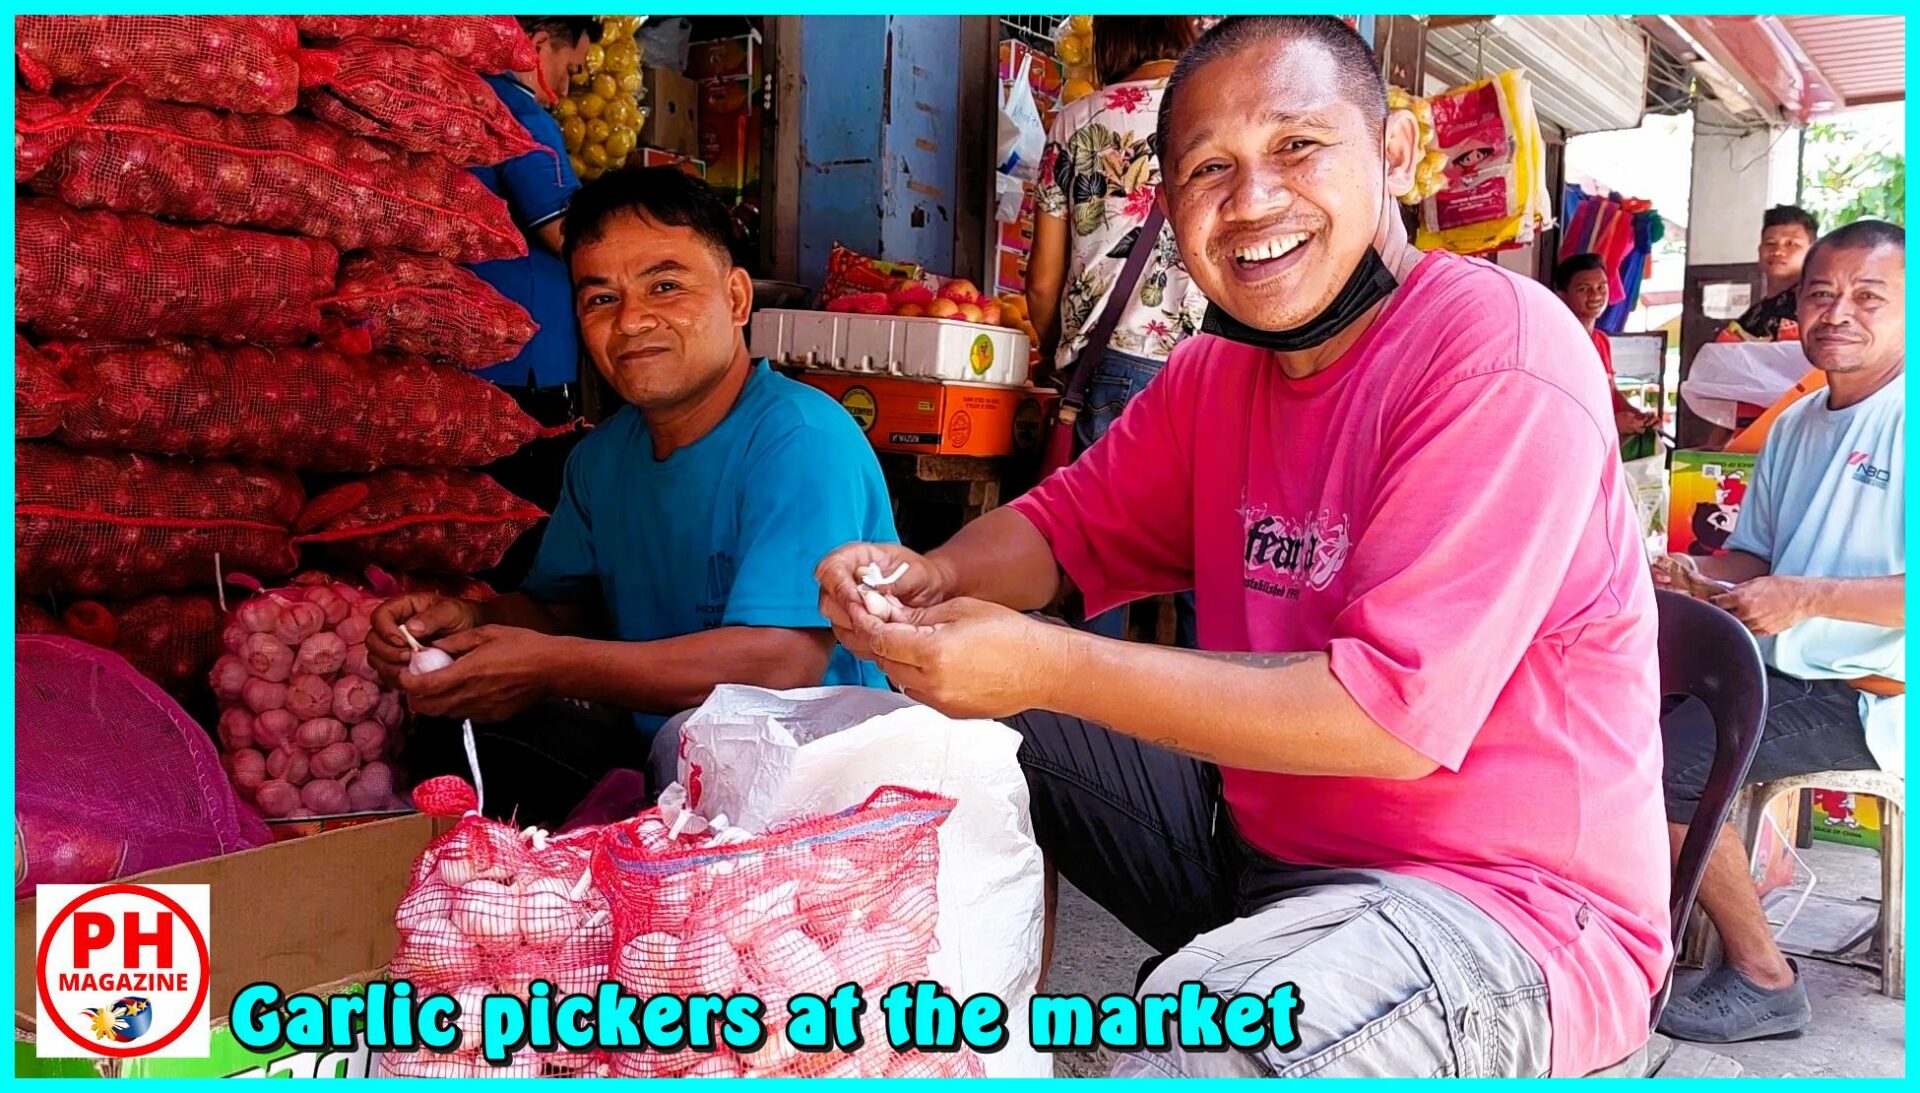 SIGHTS OF NEGROS ORIENTAL - PHOTO OF THE DAY - Garlic pickers at the market